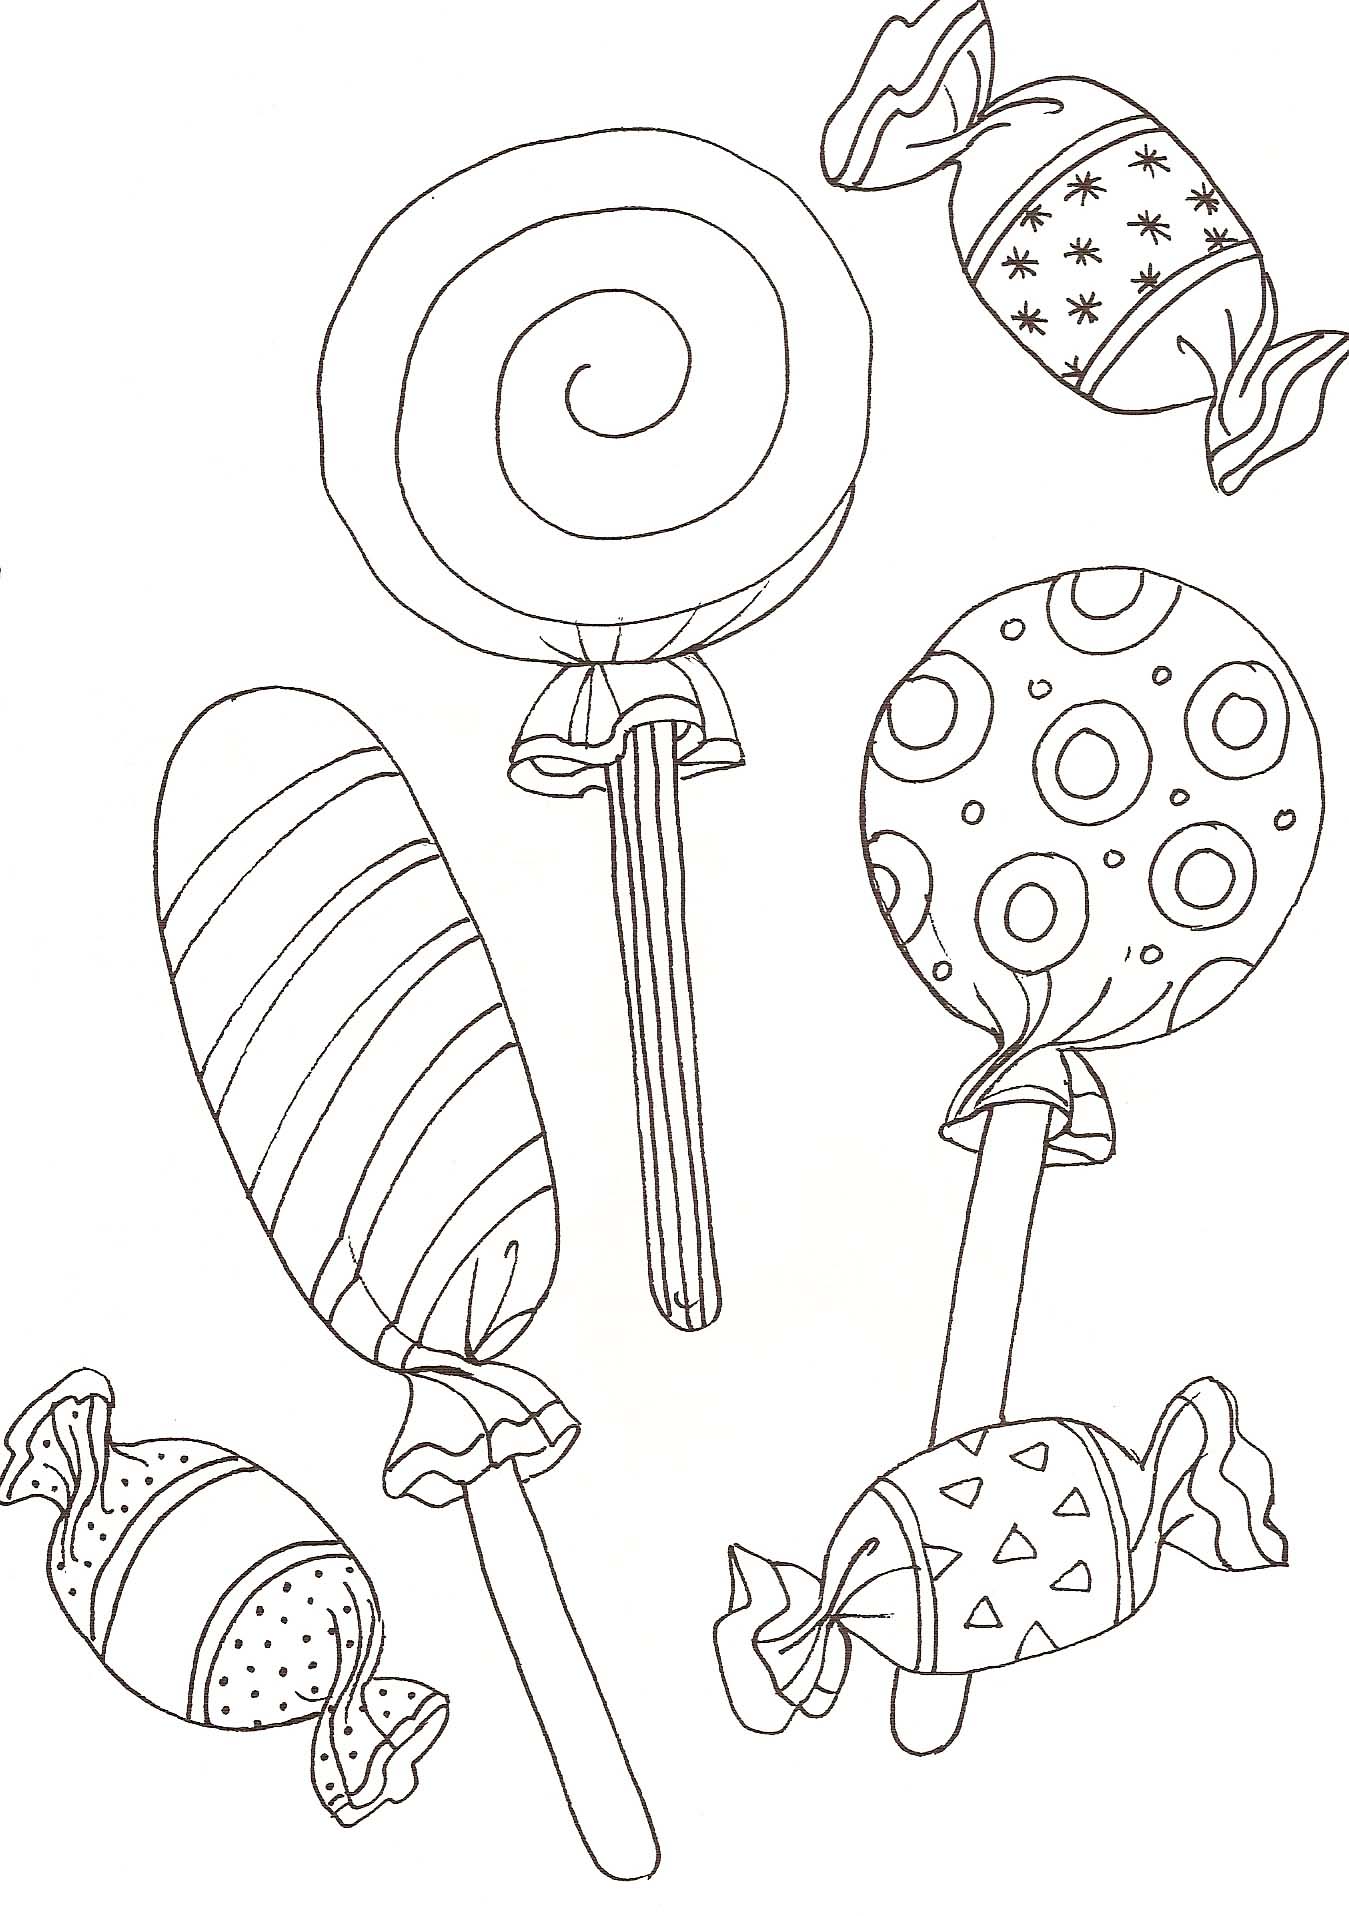 427 Animal Sweets Coloring Pages with Animal character